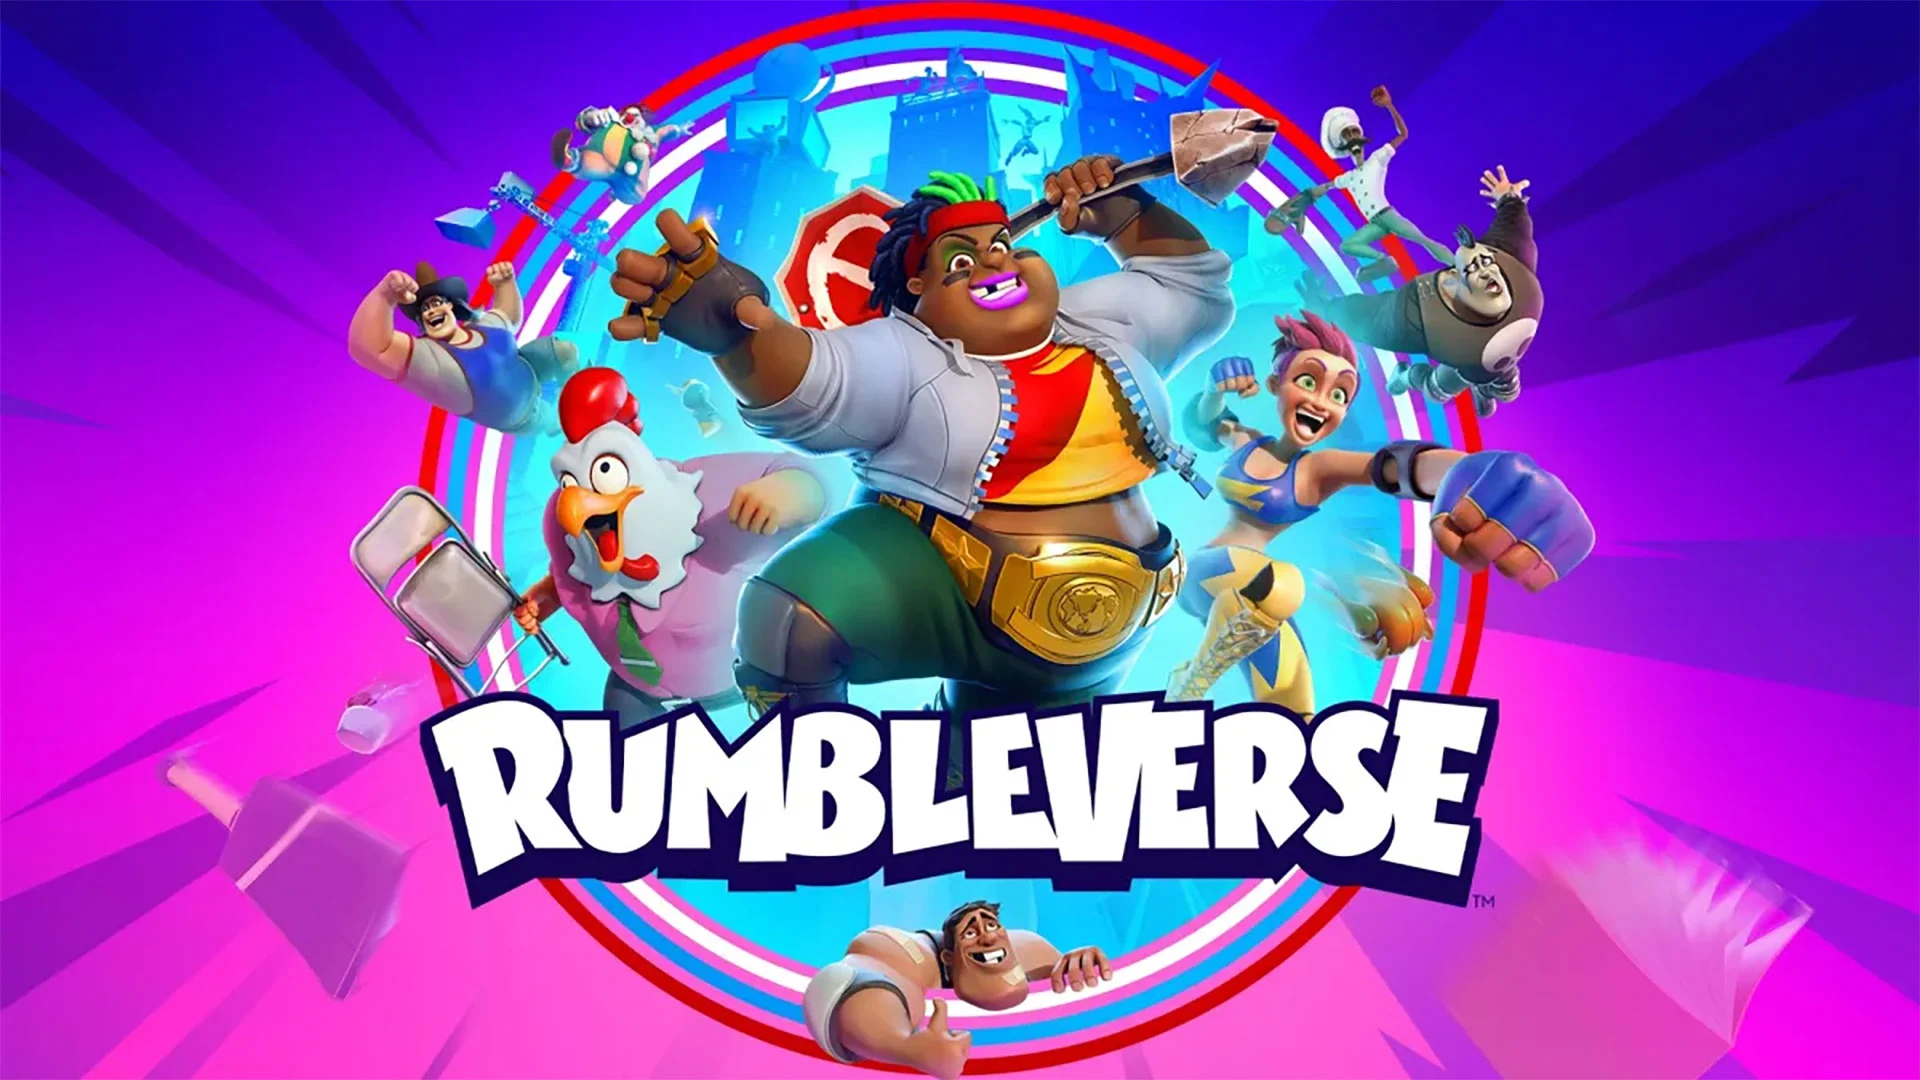 Rumbleverse Reportedly Shutting Down in February